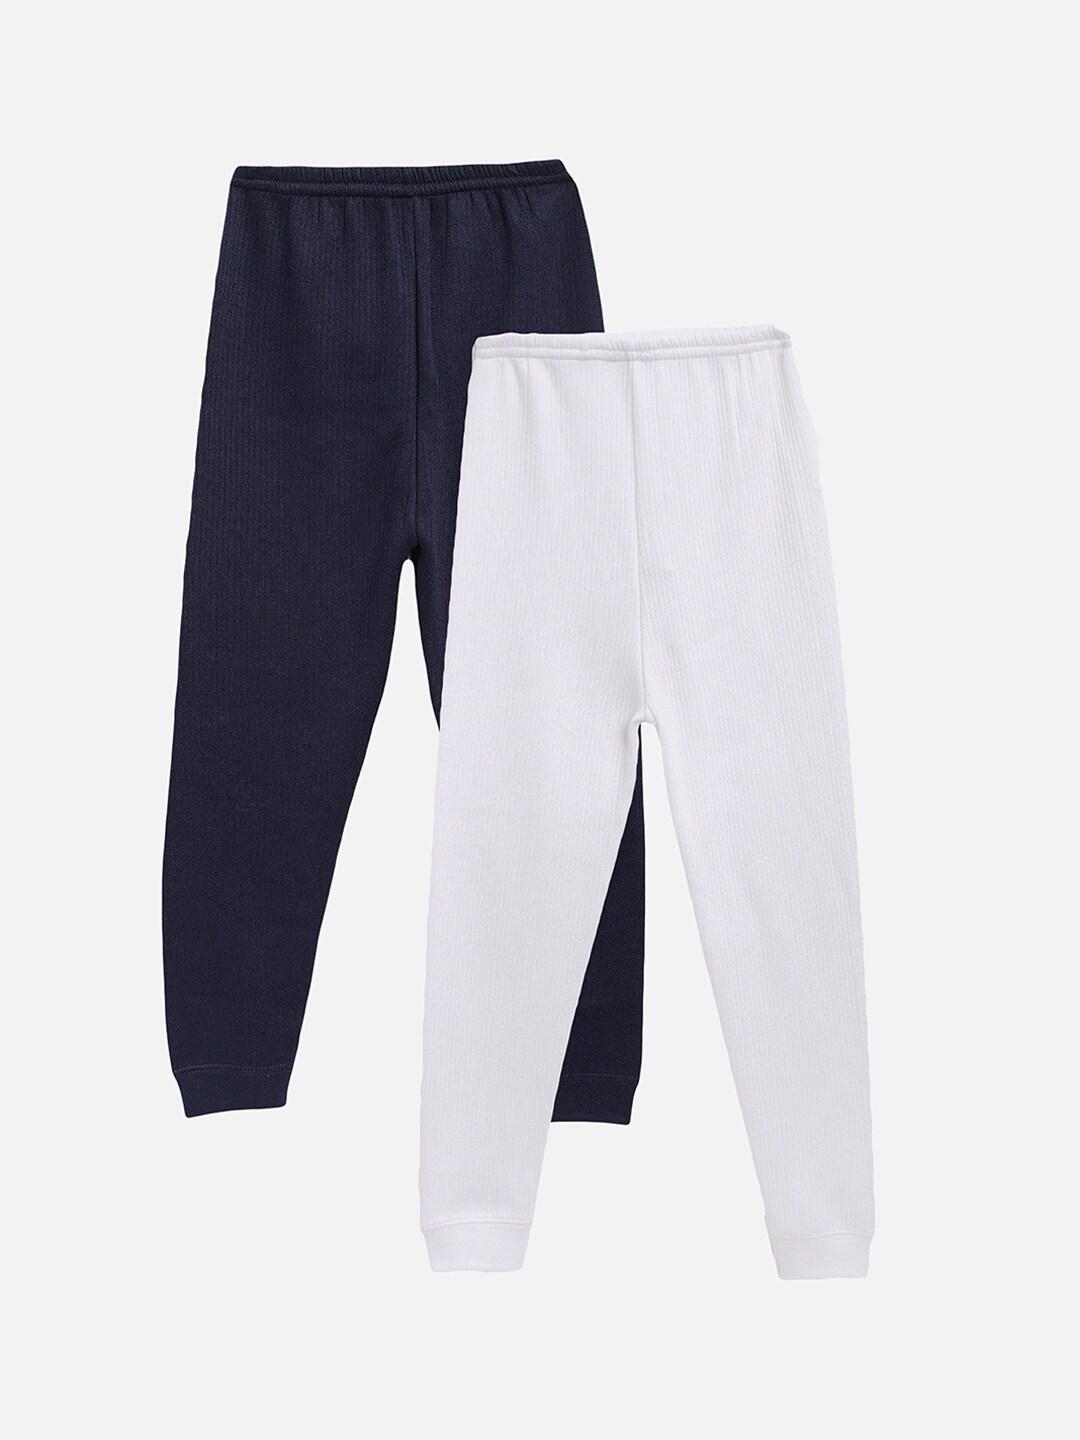 kanvin-boys-pack-of-2-navy-blue-&-white-thermal-bottoms